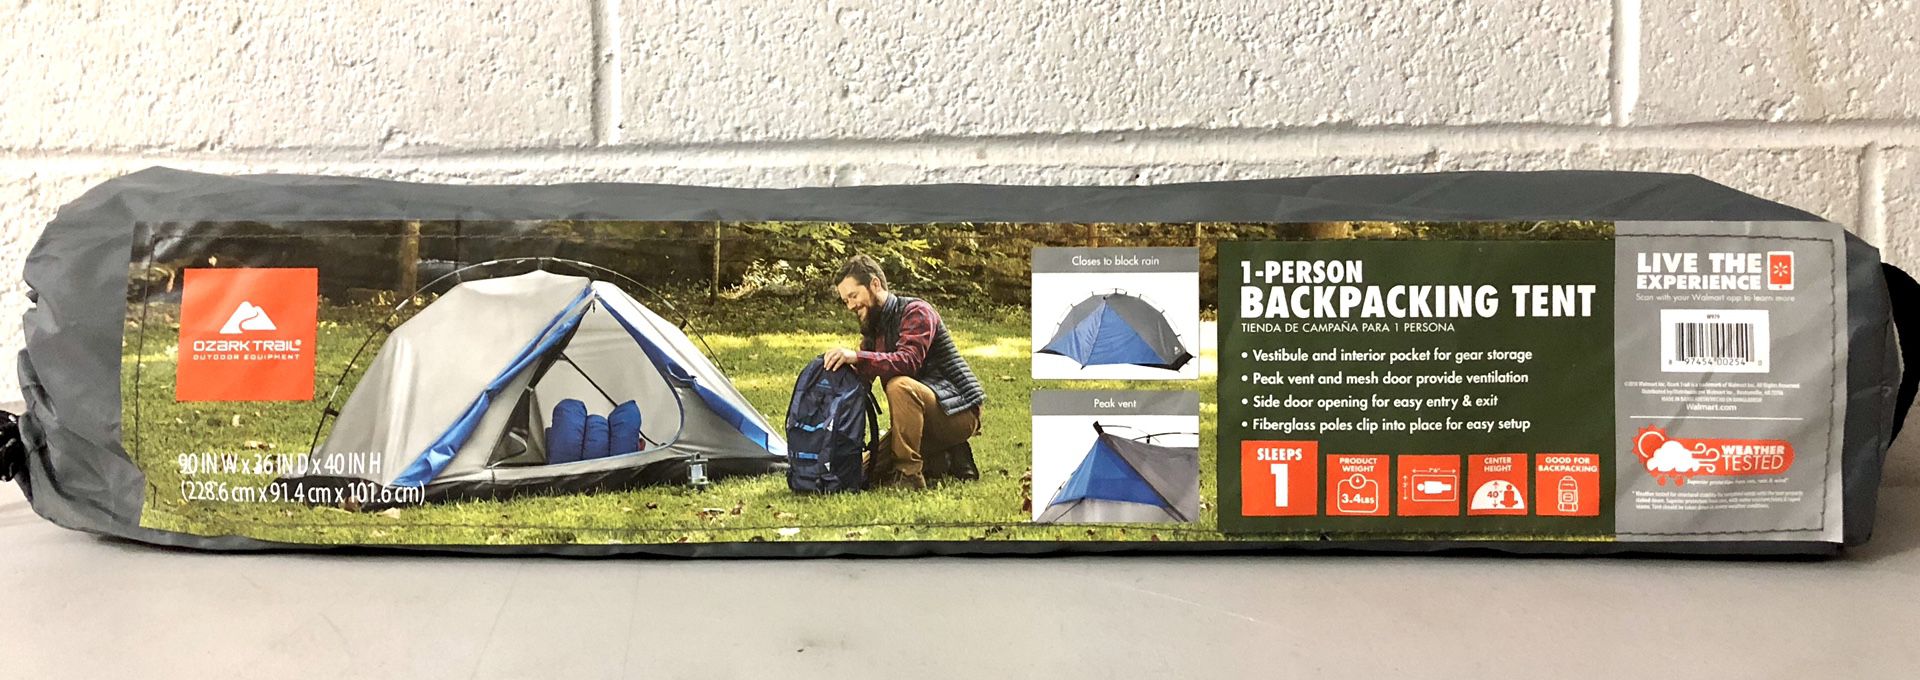 •••NEW: Ozark Trail 1-Person Backpacking Tent with Front Vestibule•••